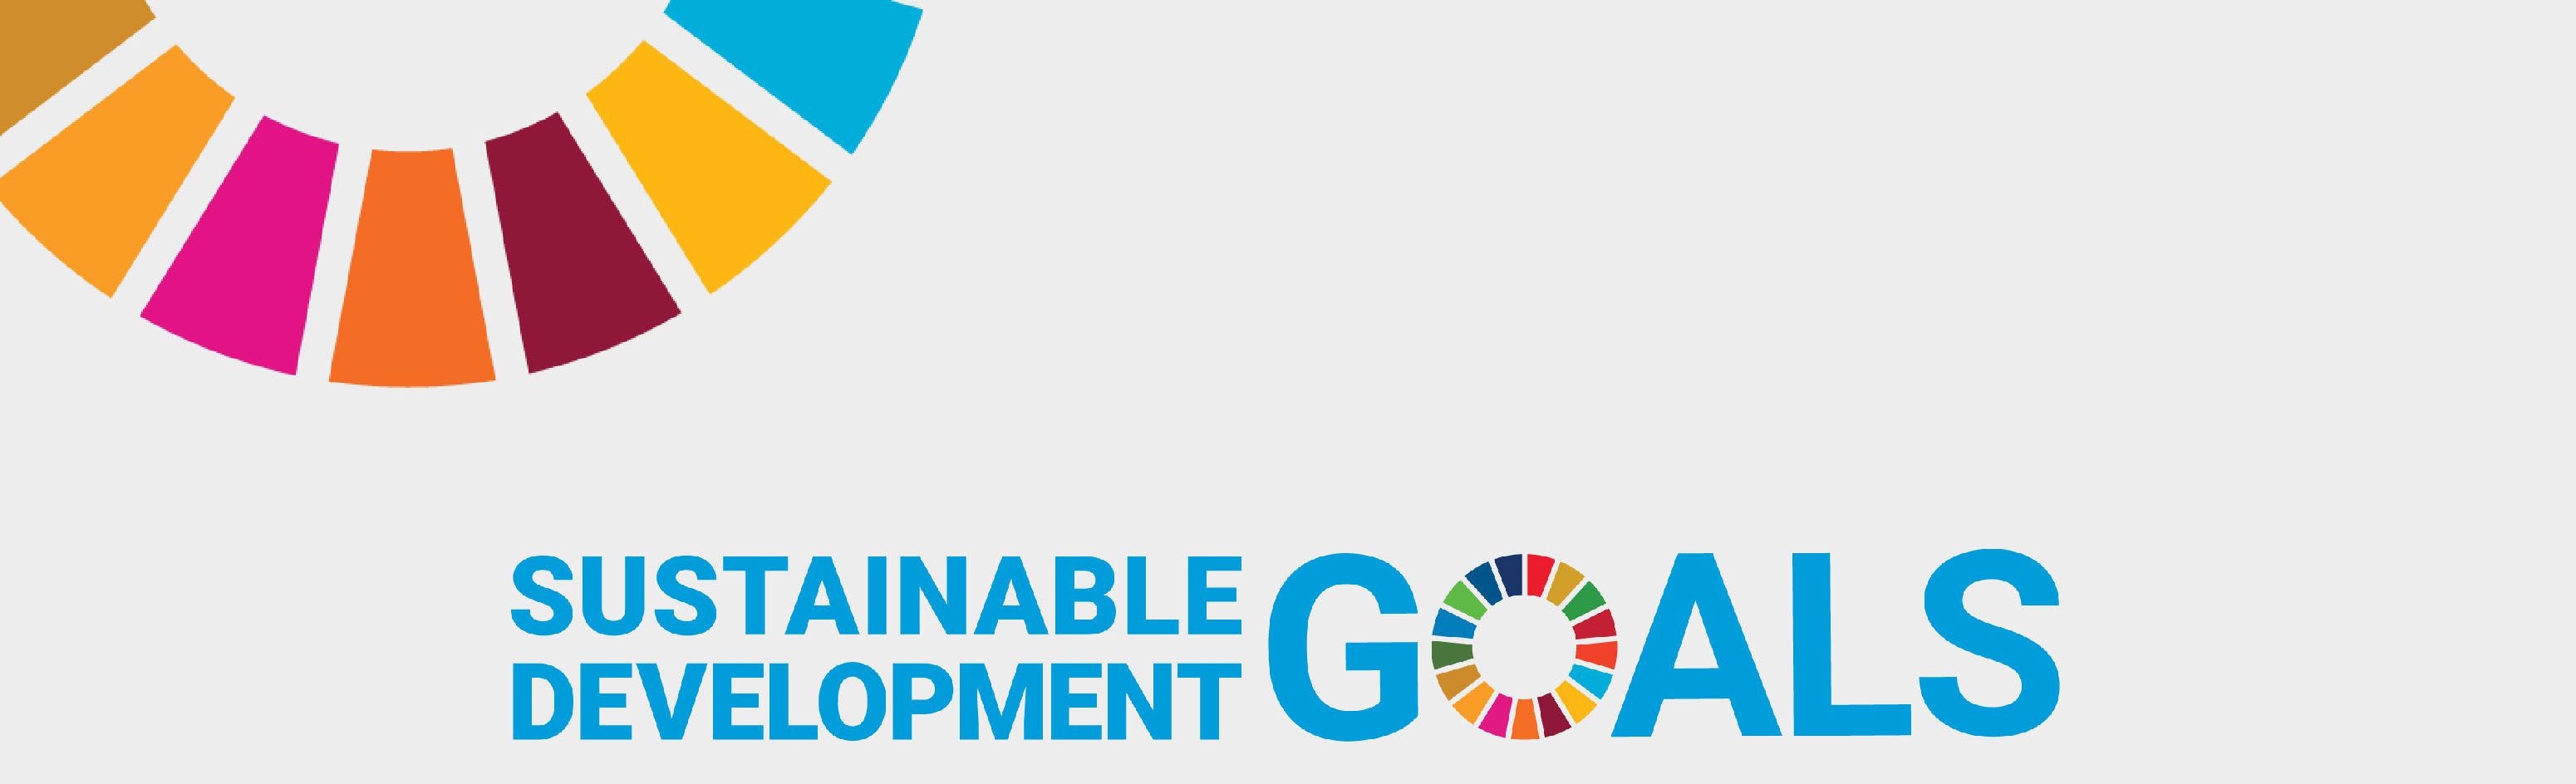 The UN Sustainable Development Goals logo, including the colour wheel on a light grey background.